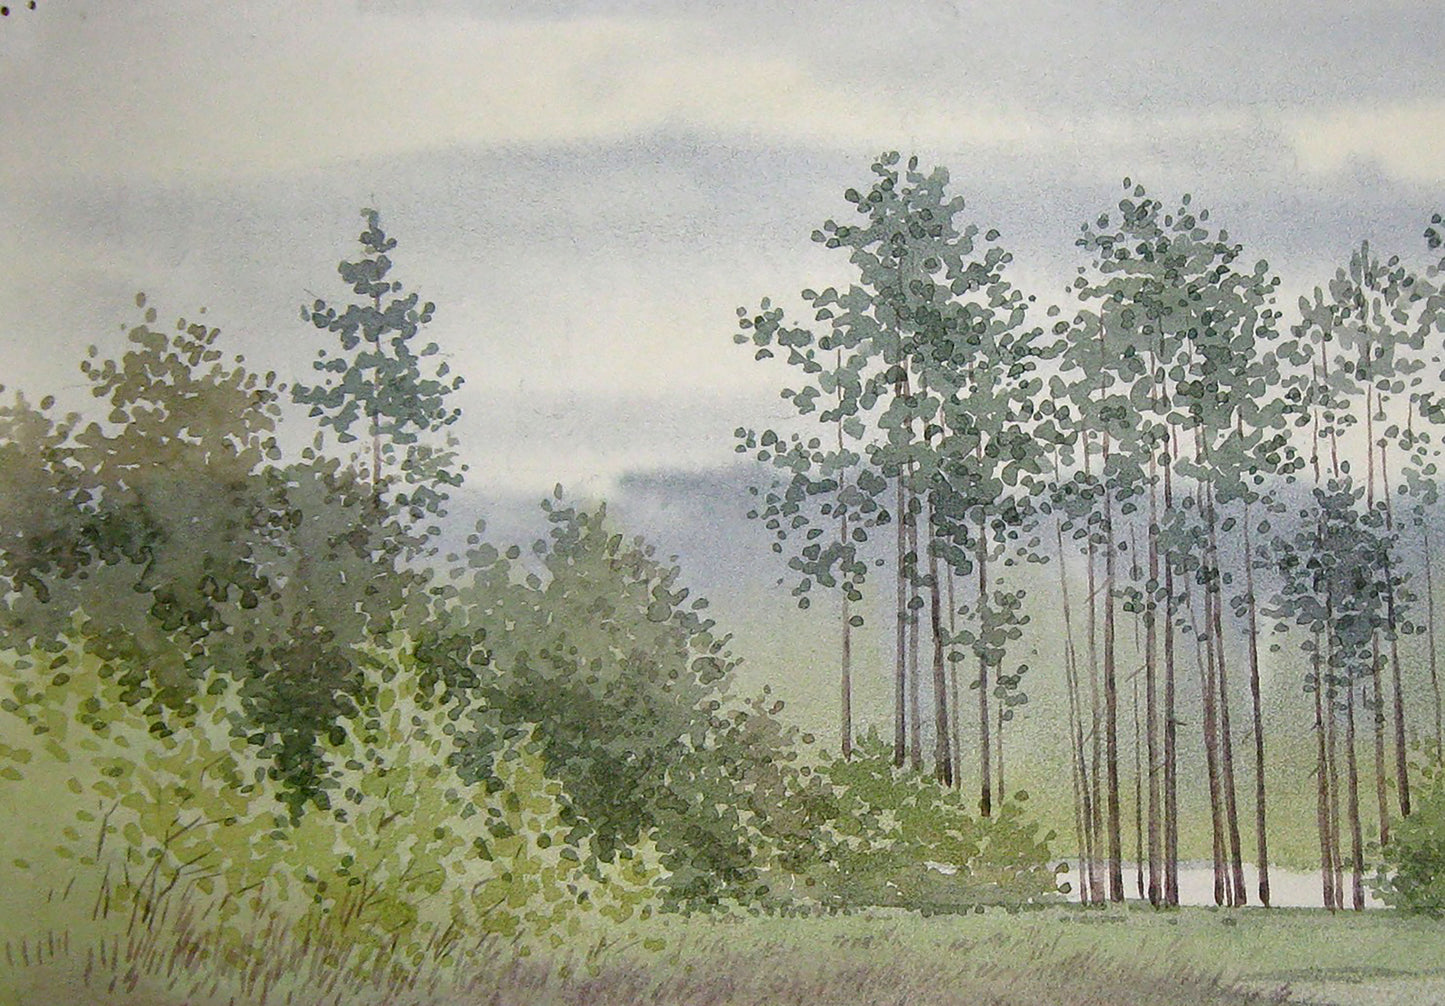 Valery Savenets captures a moment of respite in the forest in his watercolor painting